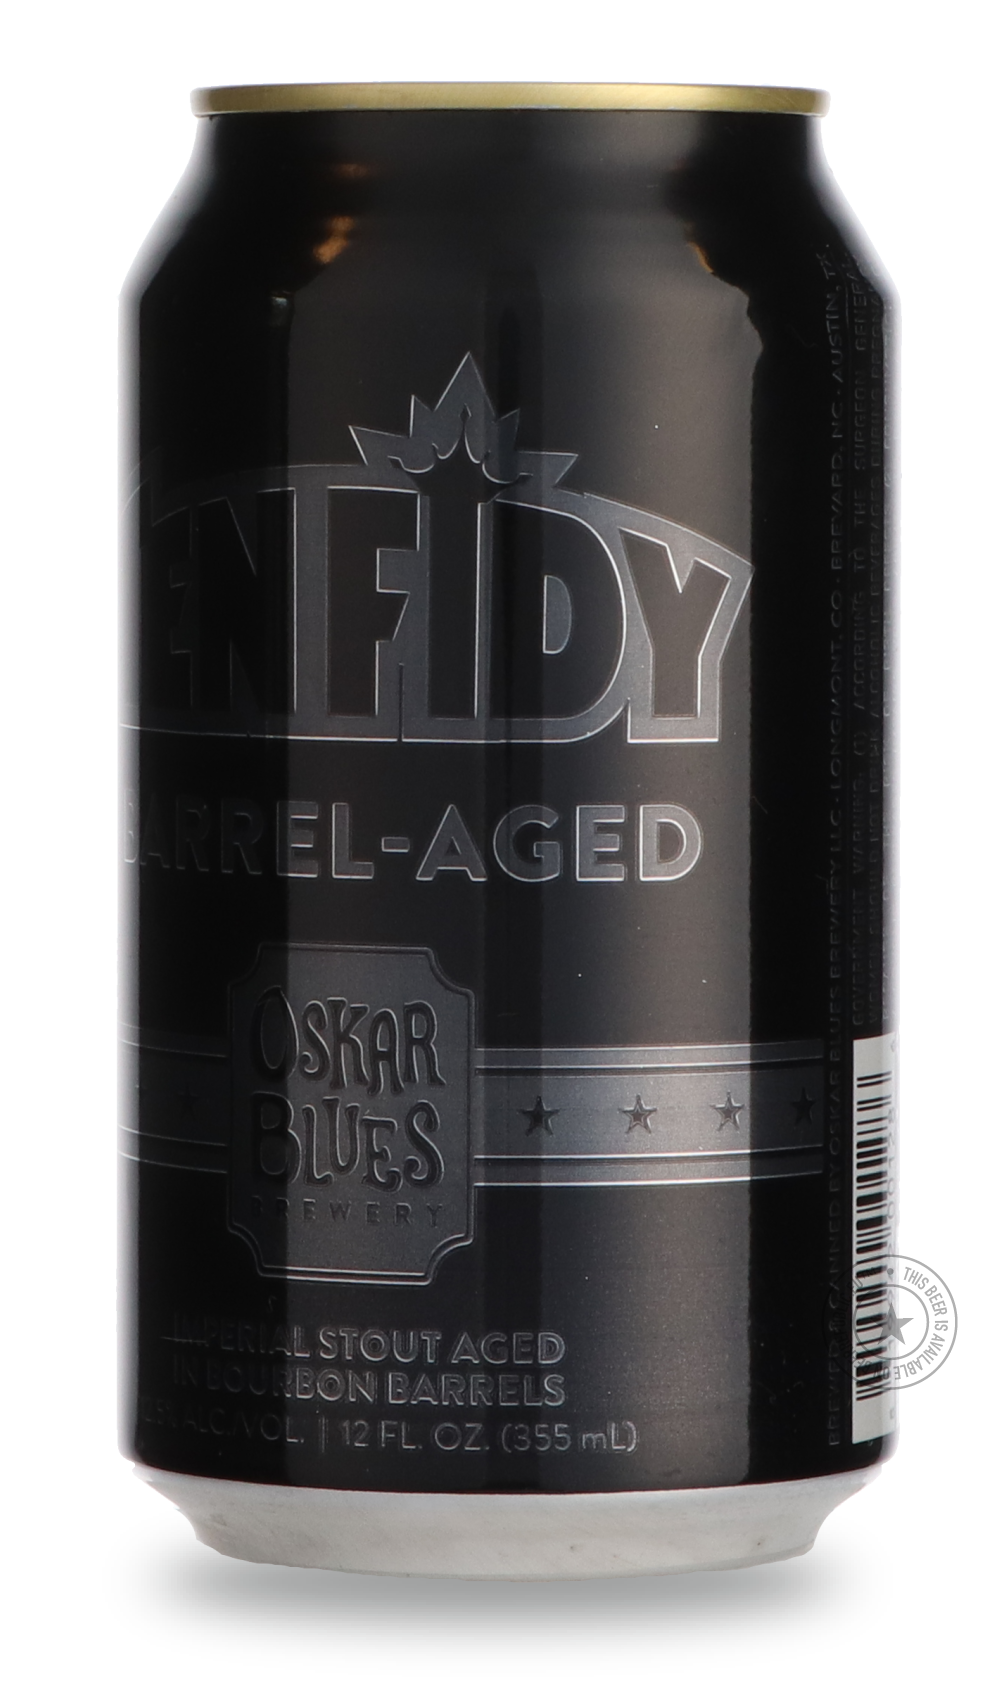 -Oskar Blues- Barrel-Aged Ten Fidy 2022-Stout & Porter- Only @ Beer Republic - The best online beer store for American & Canadian craft beer - Buy beer online from the USA and Canada - Bier online kopen - Amerikaans bier kopen - Craft beer store - Craft beer kopen - Amerikanisch bier kaufen - Bier online kaufen - Acheter biere online - IPA - Stout - Porter - New England IPA - Hazy IPA - Imperial Stout - Barrel Aged - Barrel Aged Imperial Stout - Brown - Dark beer - Blond - Blonde - Pilsner - Lager - Wheat -